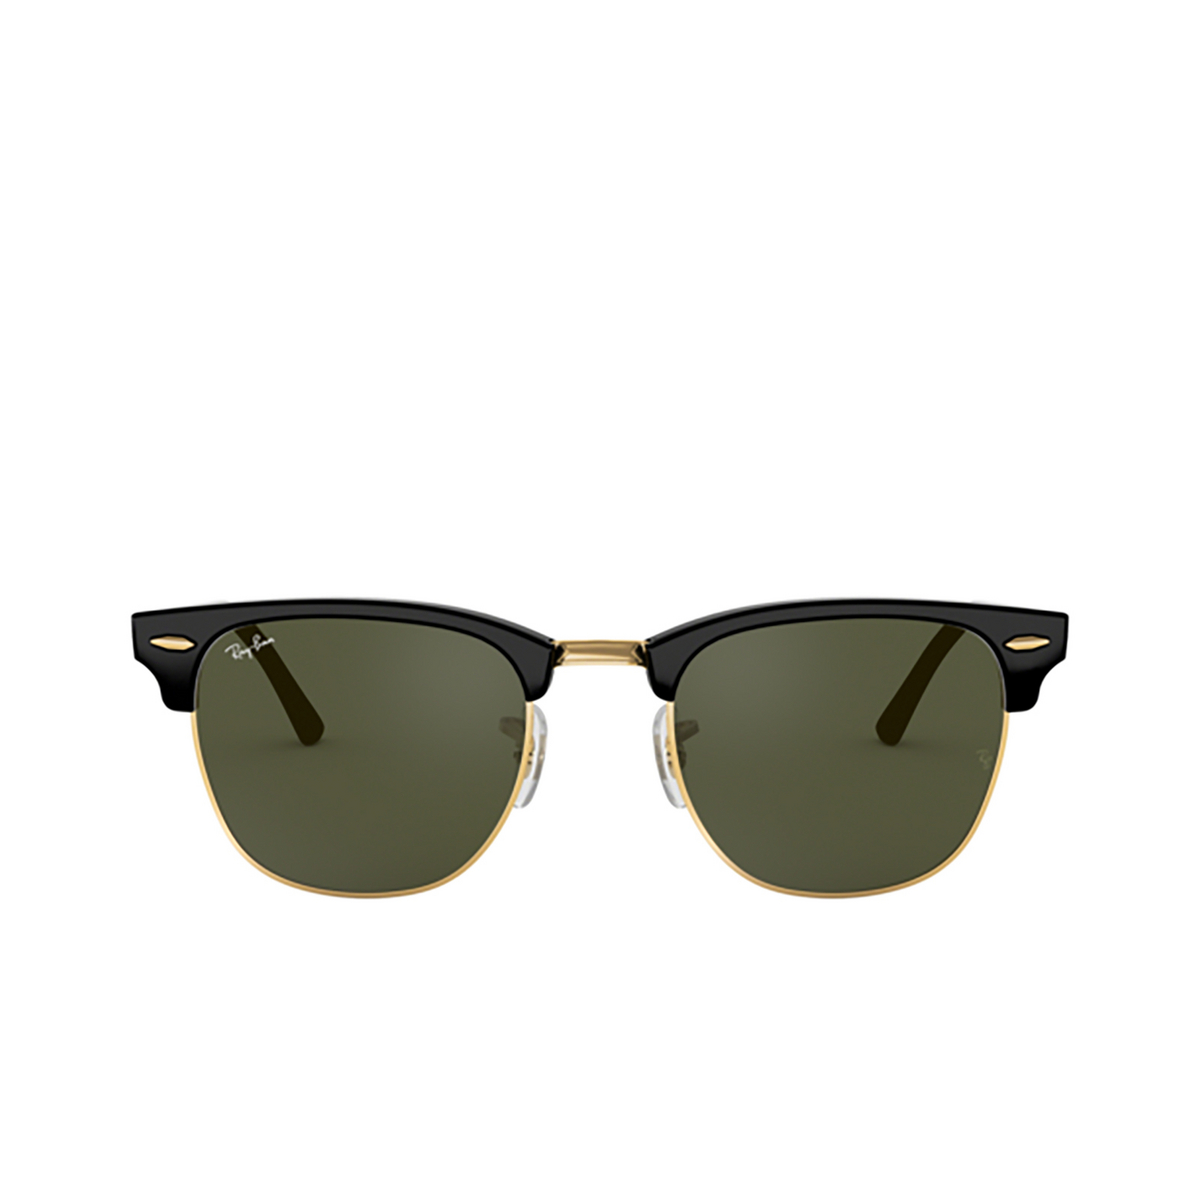 Ray-Ban CLUBMASTER Sunglasses W0365 BLACK ON ARISTA - front view